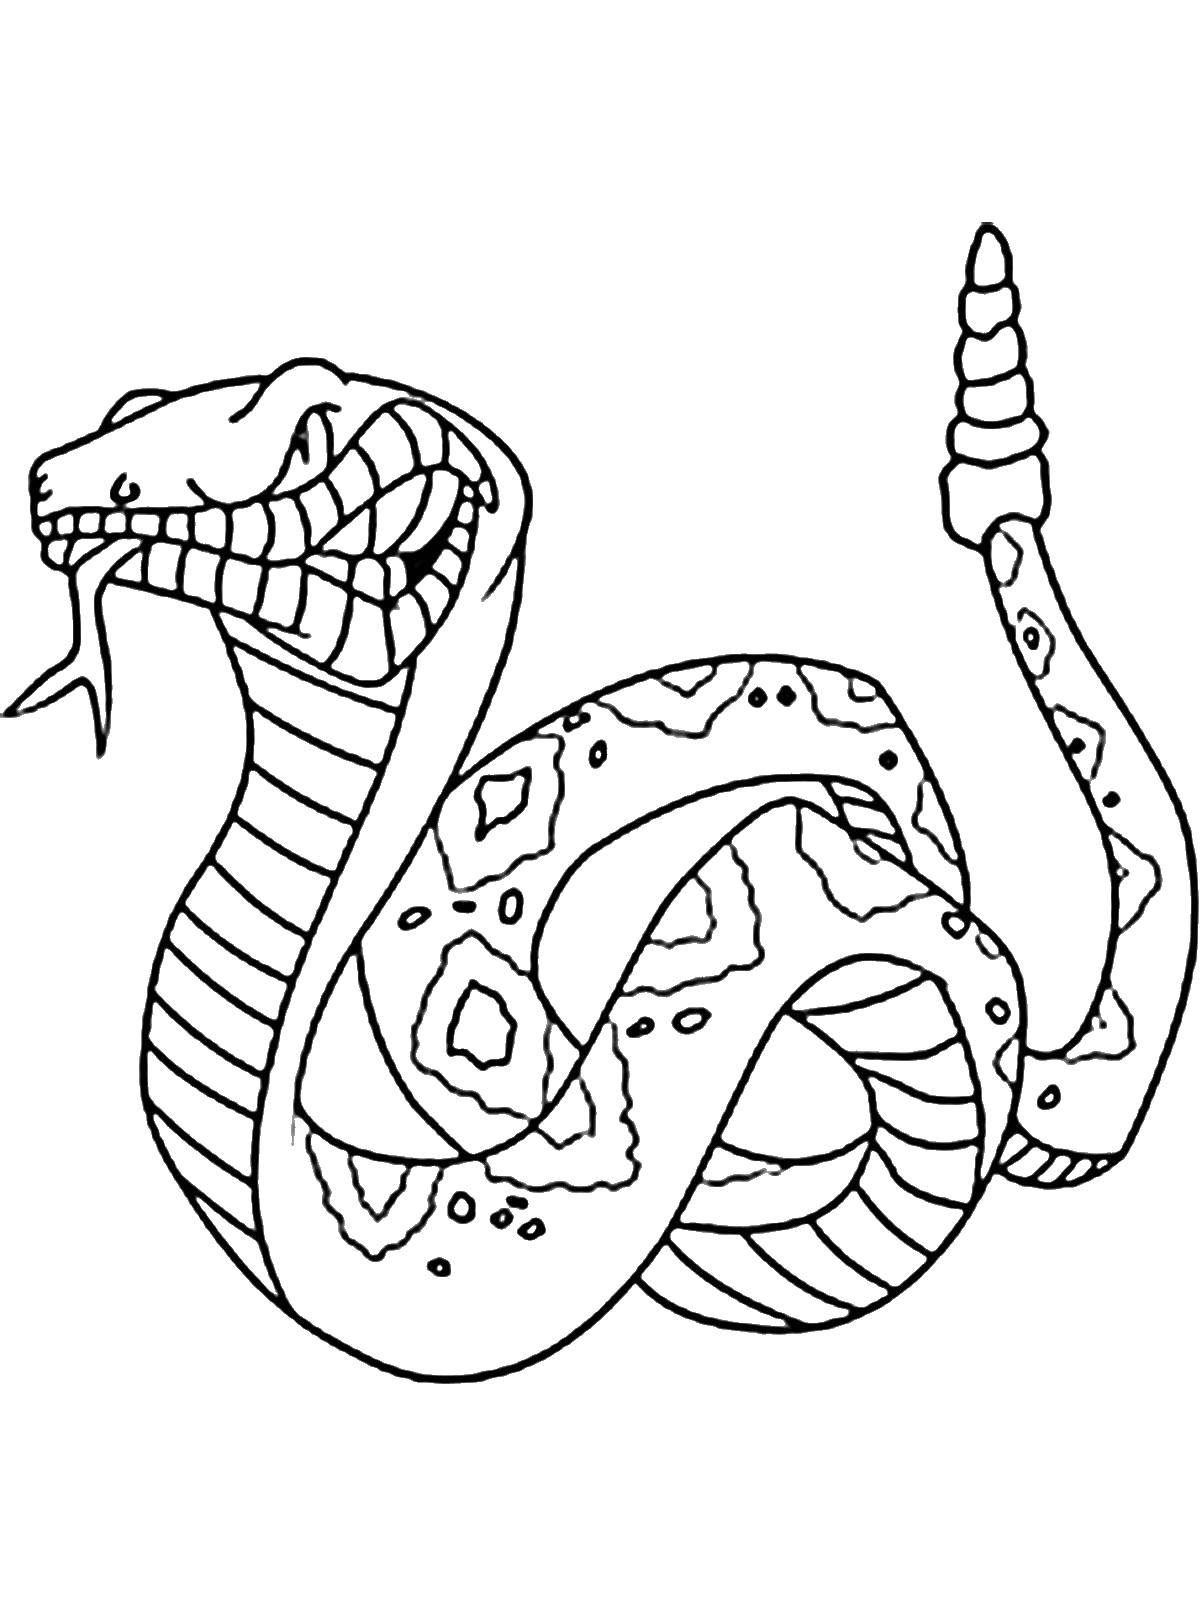 Coloring Snake - rattle. Category reptiles. Tags:  Reptile, snake.